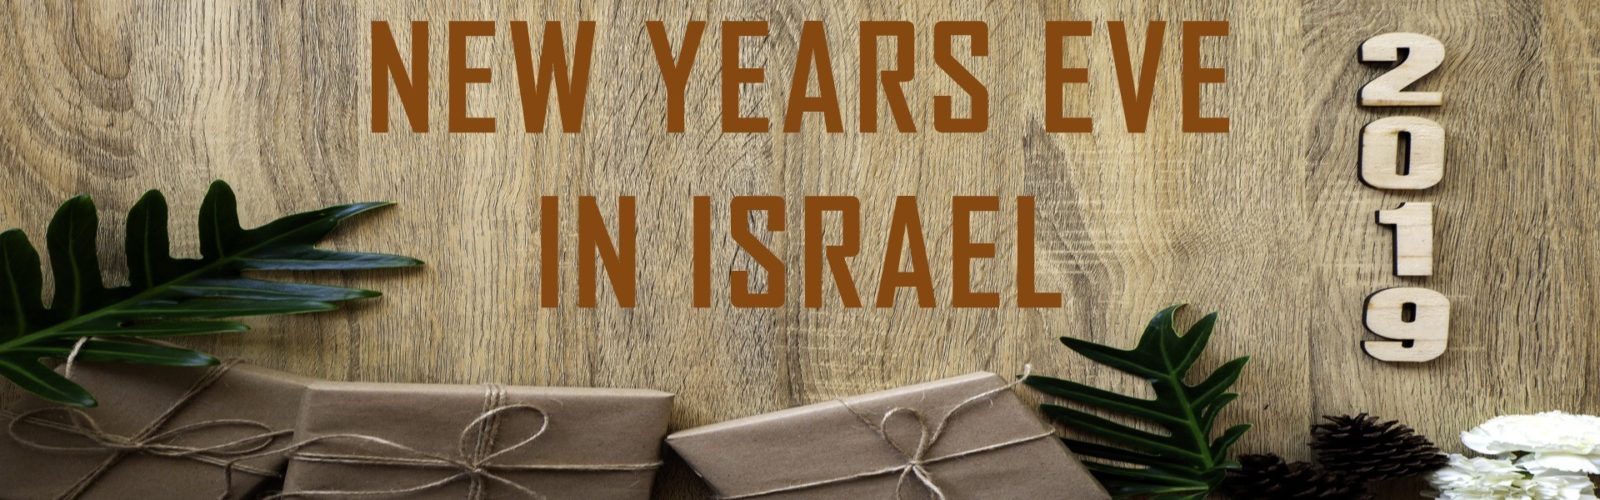 New Years Eve in Israel | Sylvester in Israel